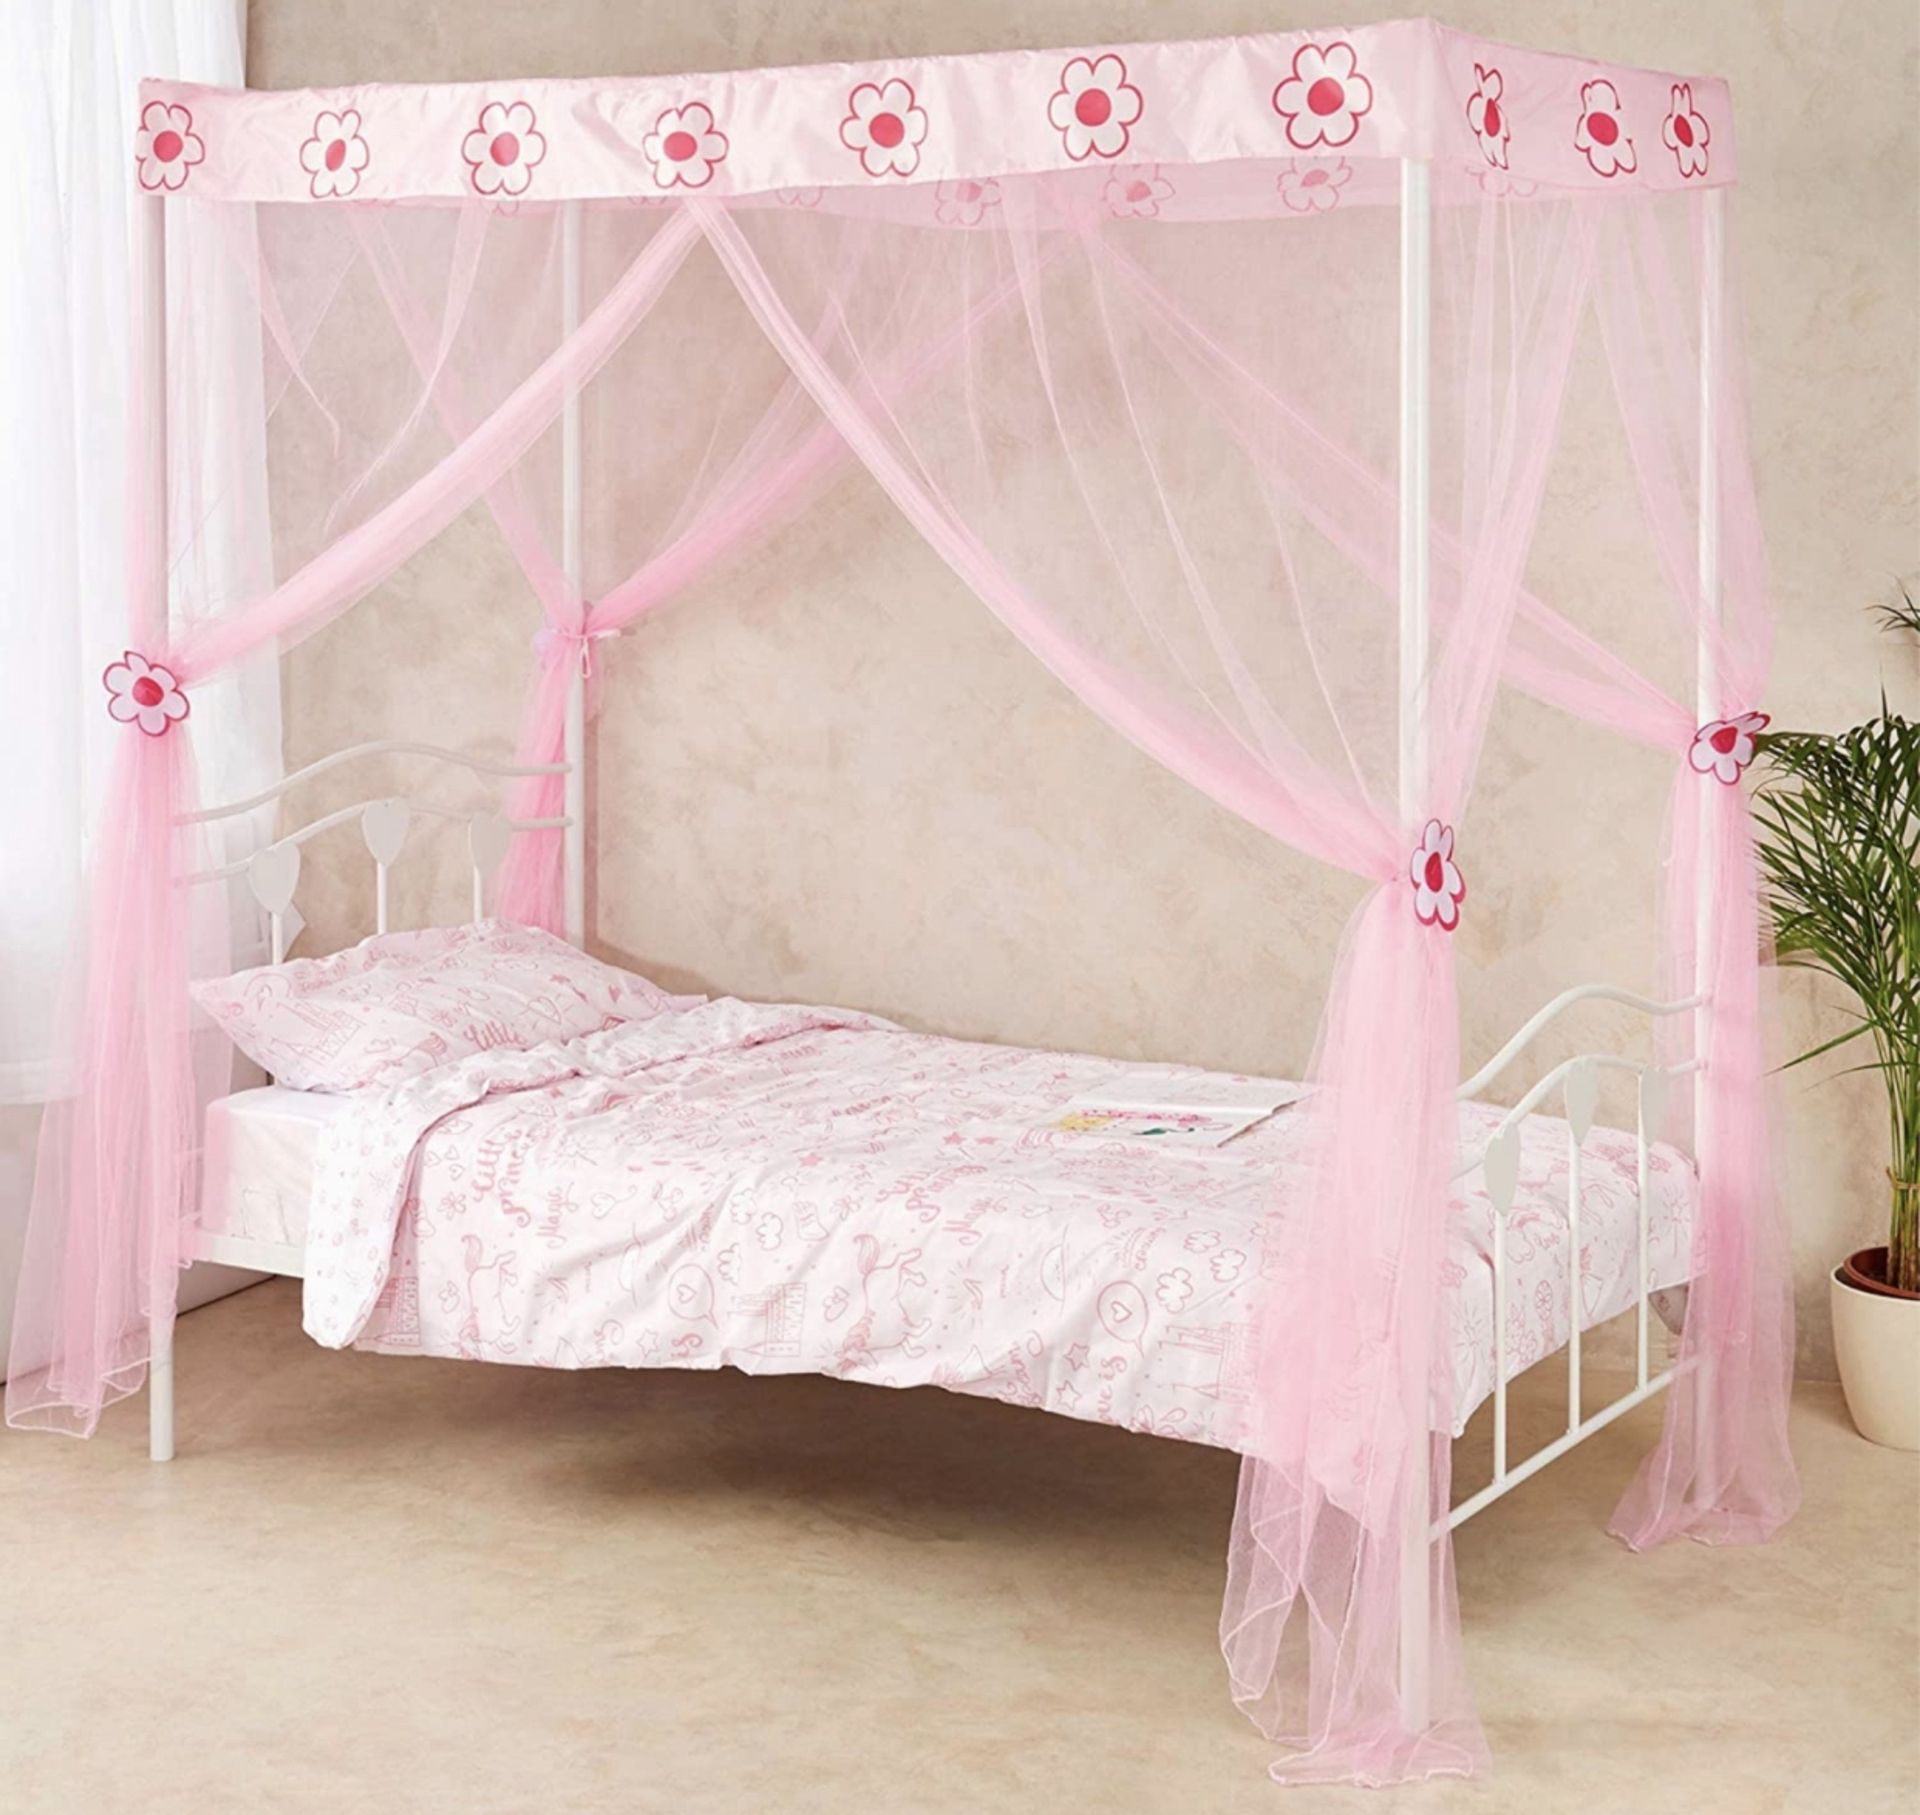 Wremedies Girls Princess Pink Canopy Bed Netting RRP £22.99